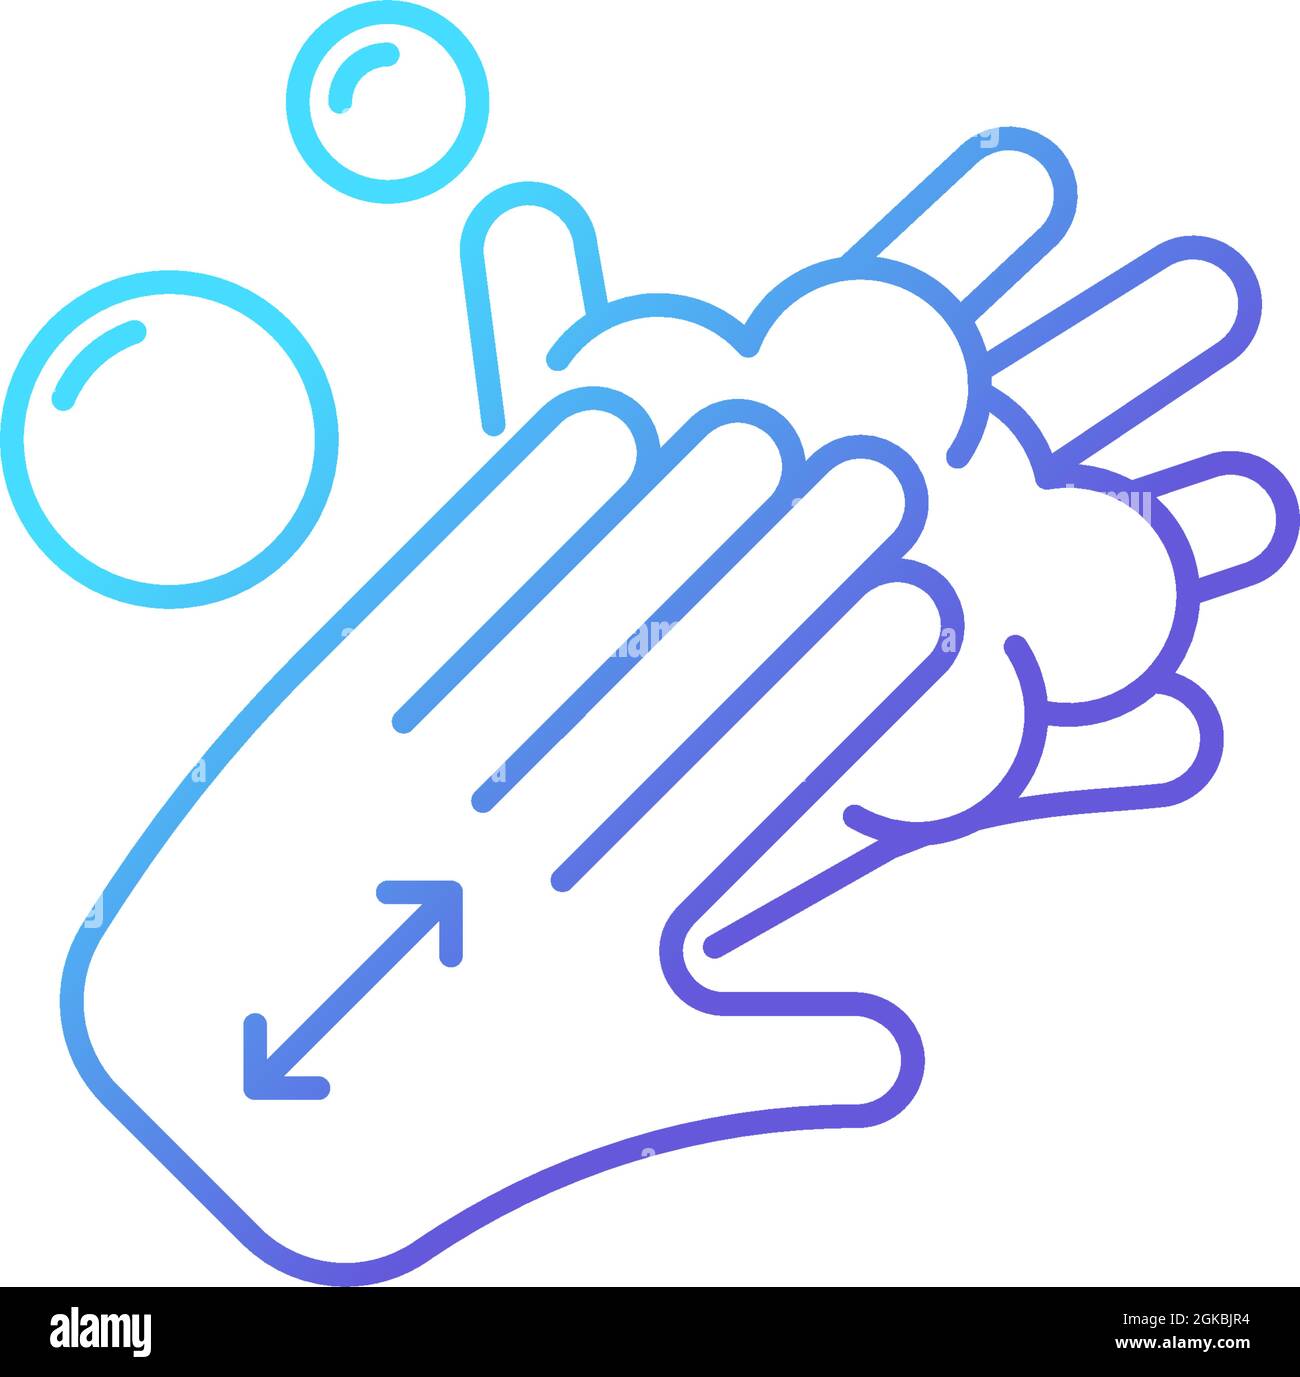 Lathering back of hands gradient linear vector icon Stock Vector